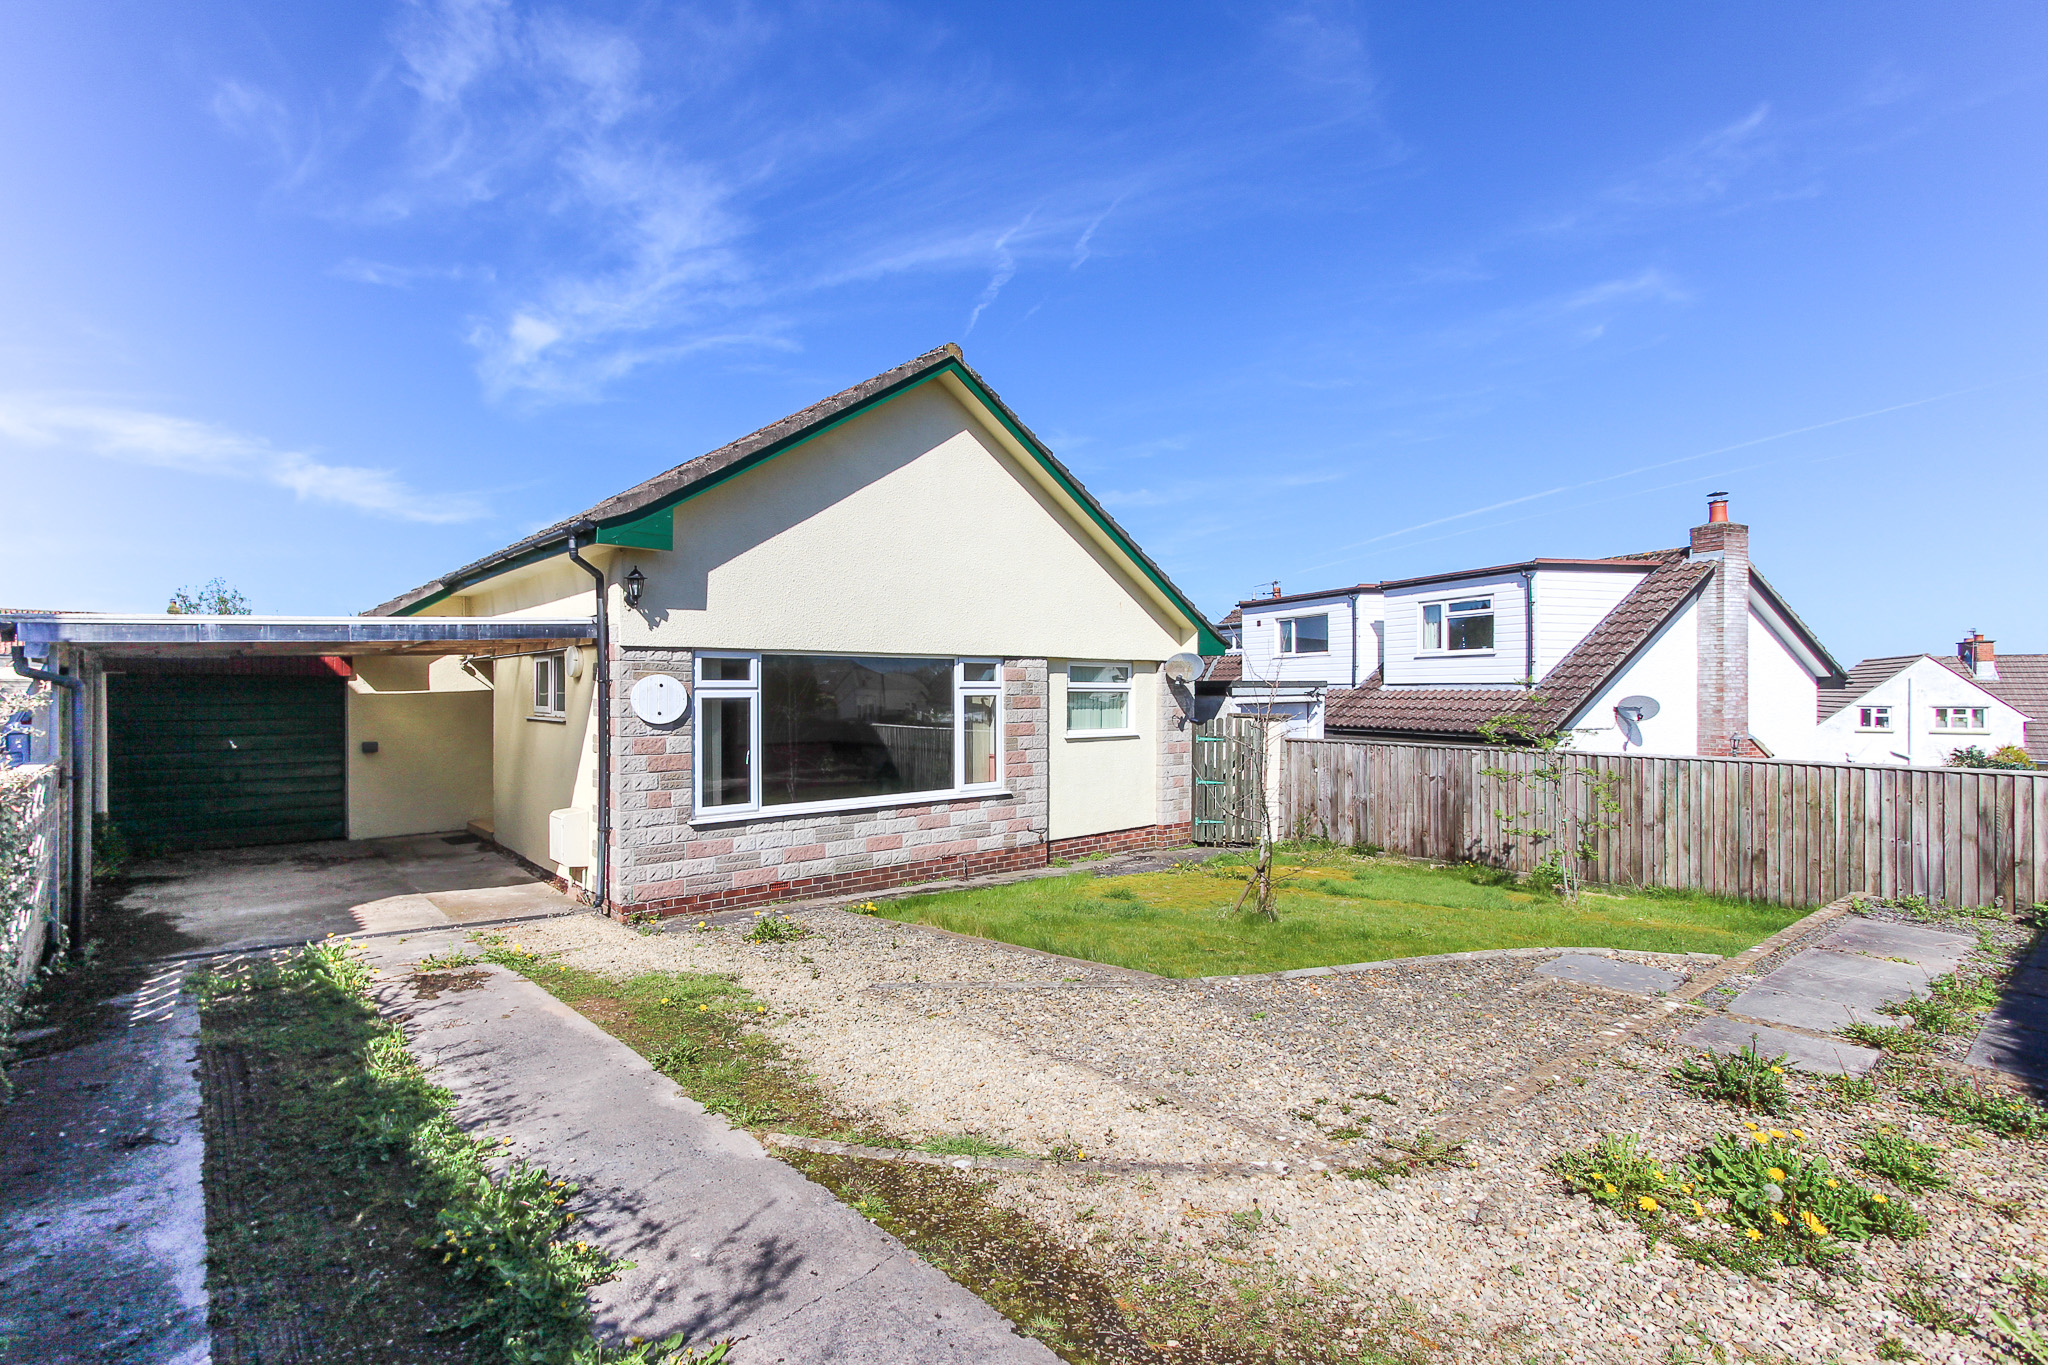 Glovers Field, Shipham - 2 bedroom bungalow with lovely gardens, parking and garage